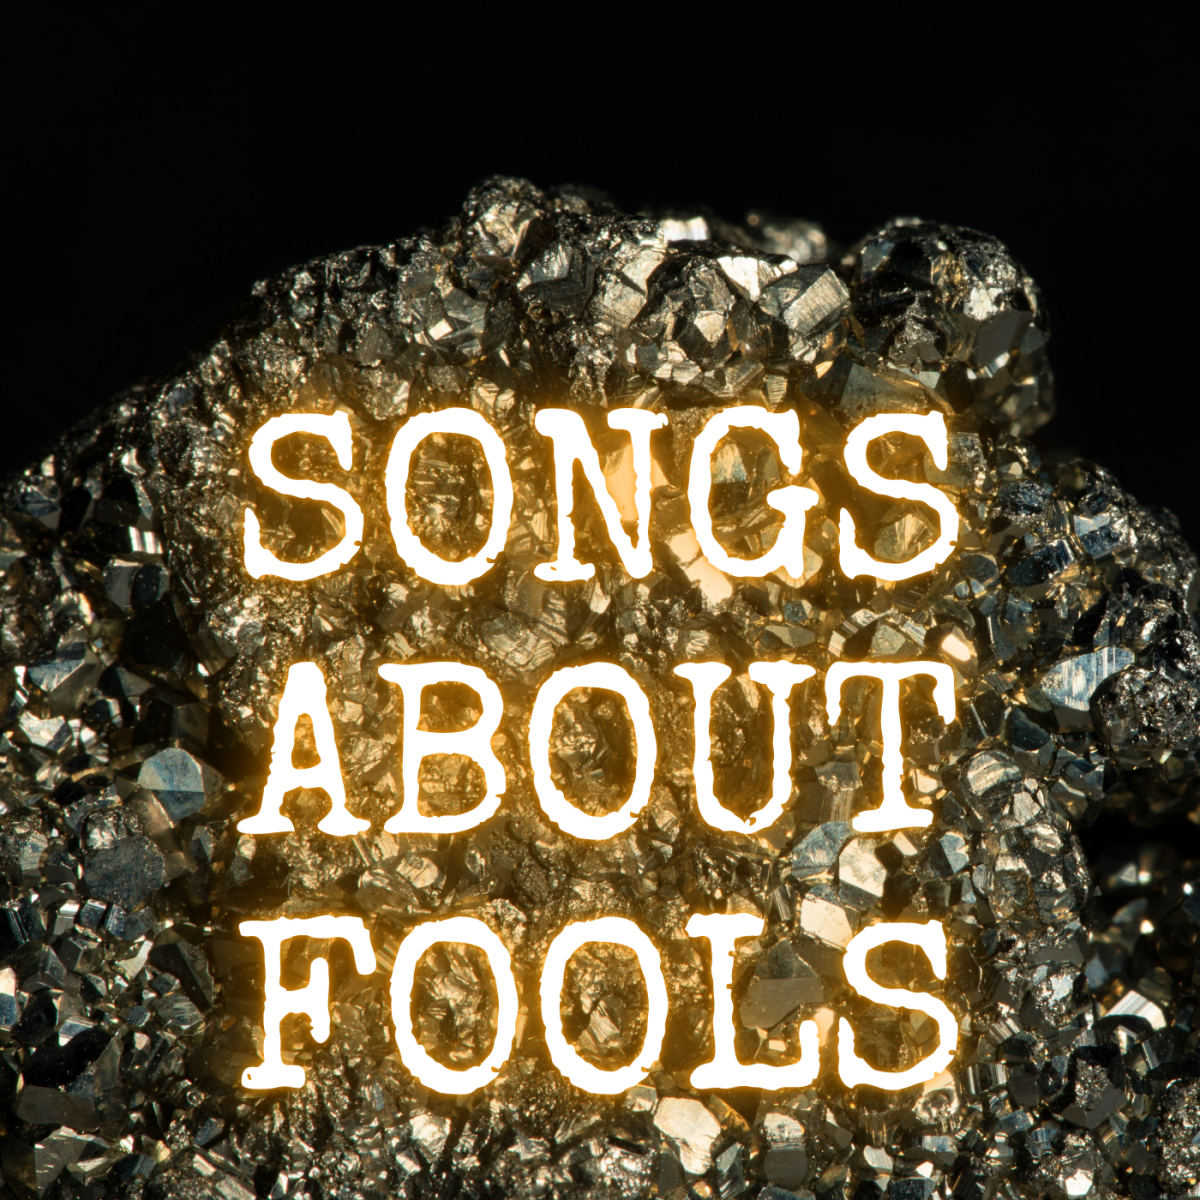 From love fools to fool's gold, celebrate April Fool's Day with a playlist of pop, rock, country, and R&B songs about fools. Everyone plays the fool on occasion, right?